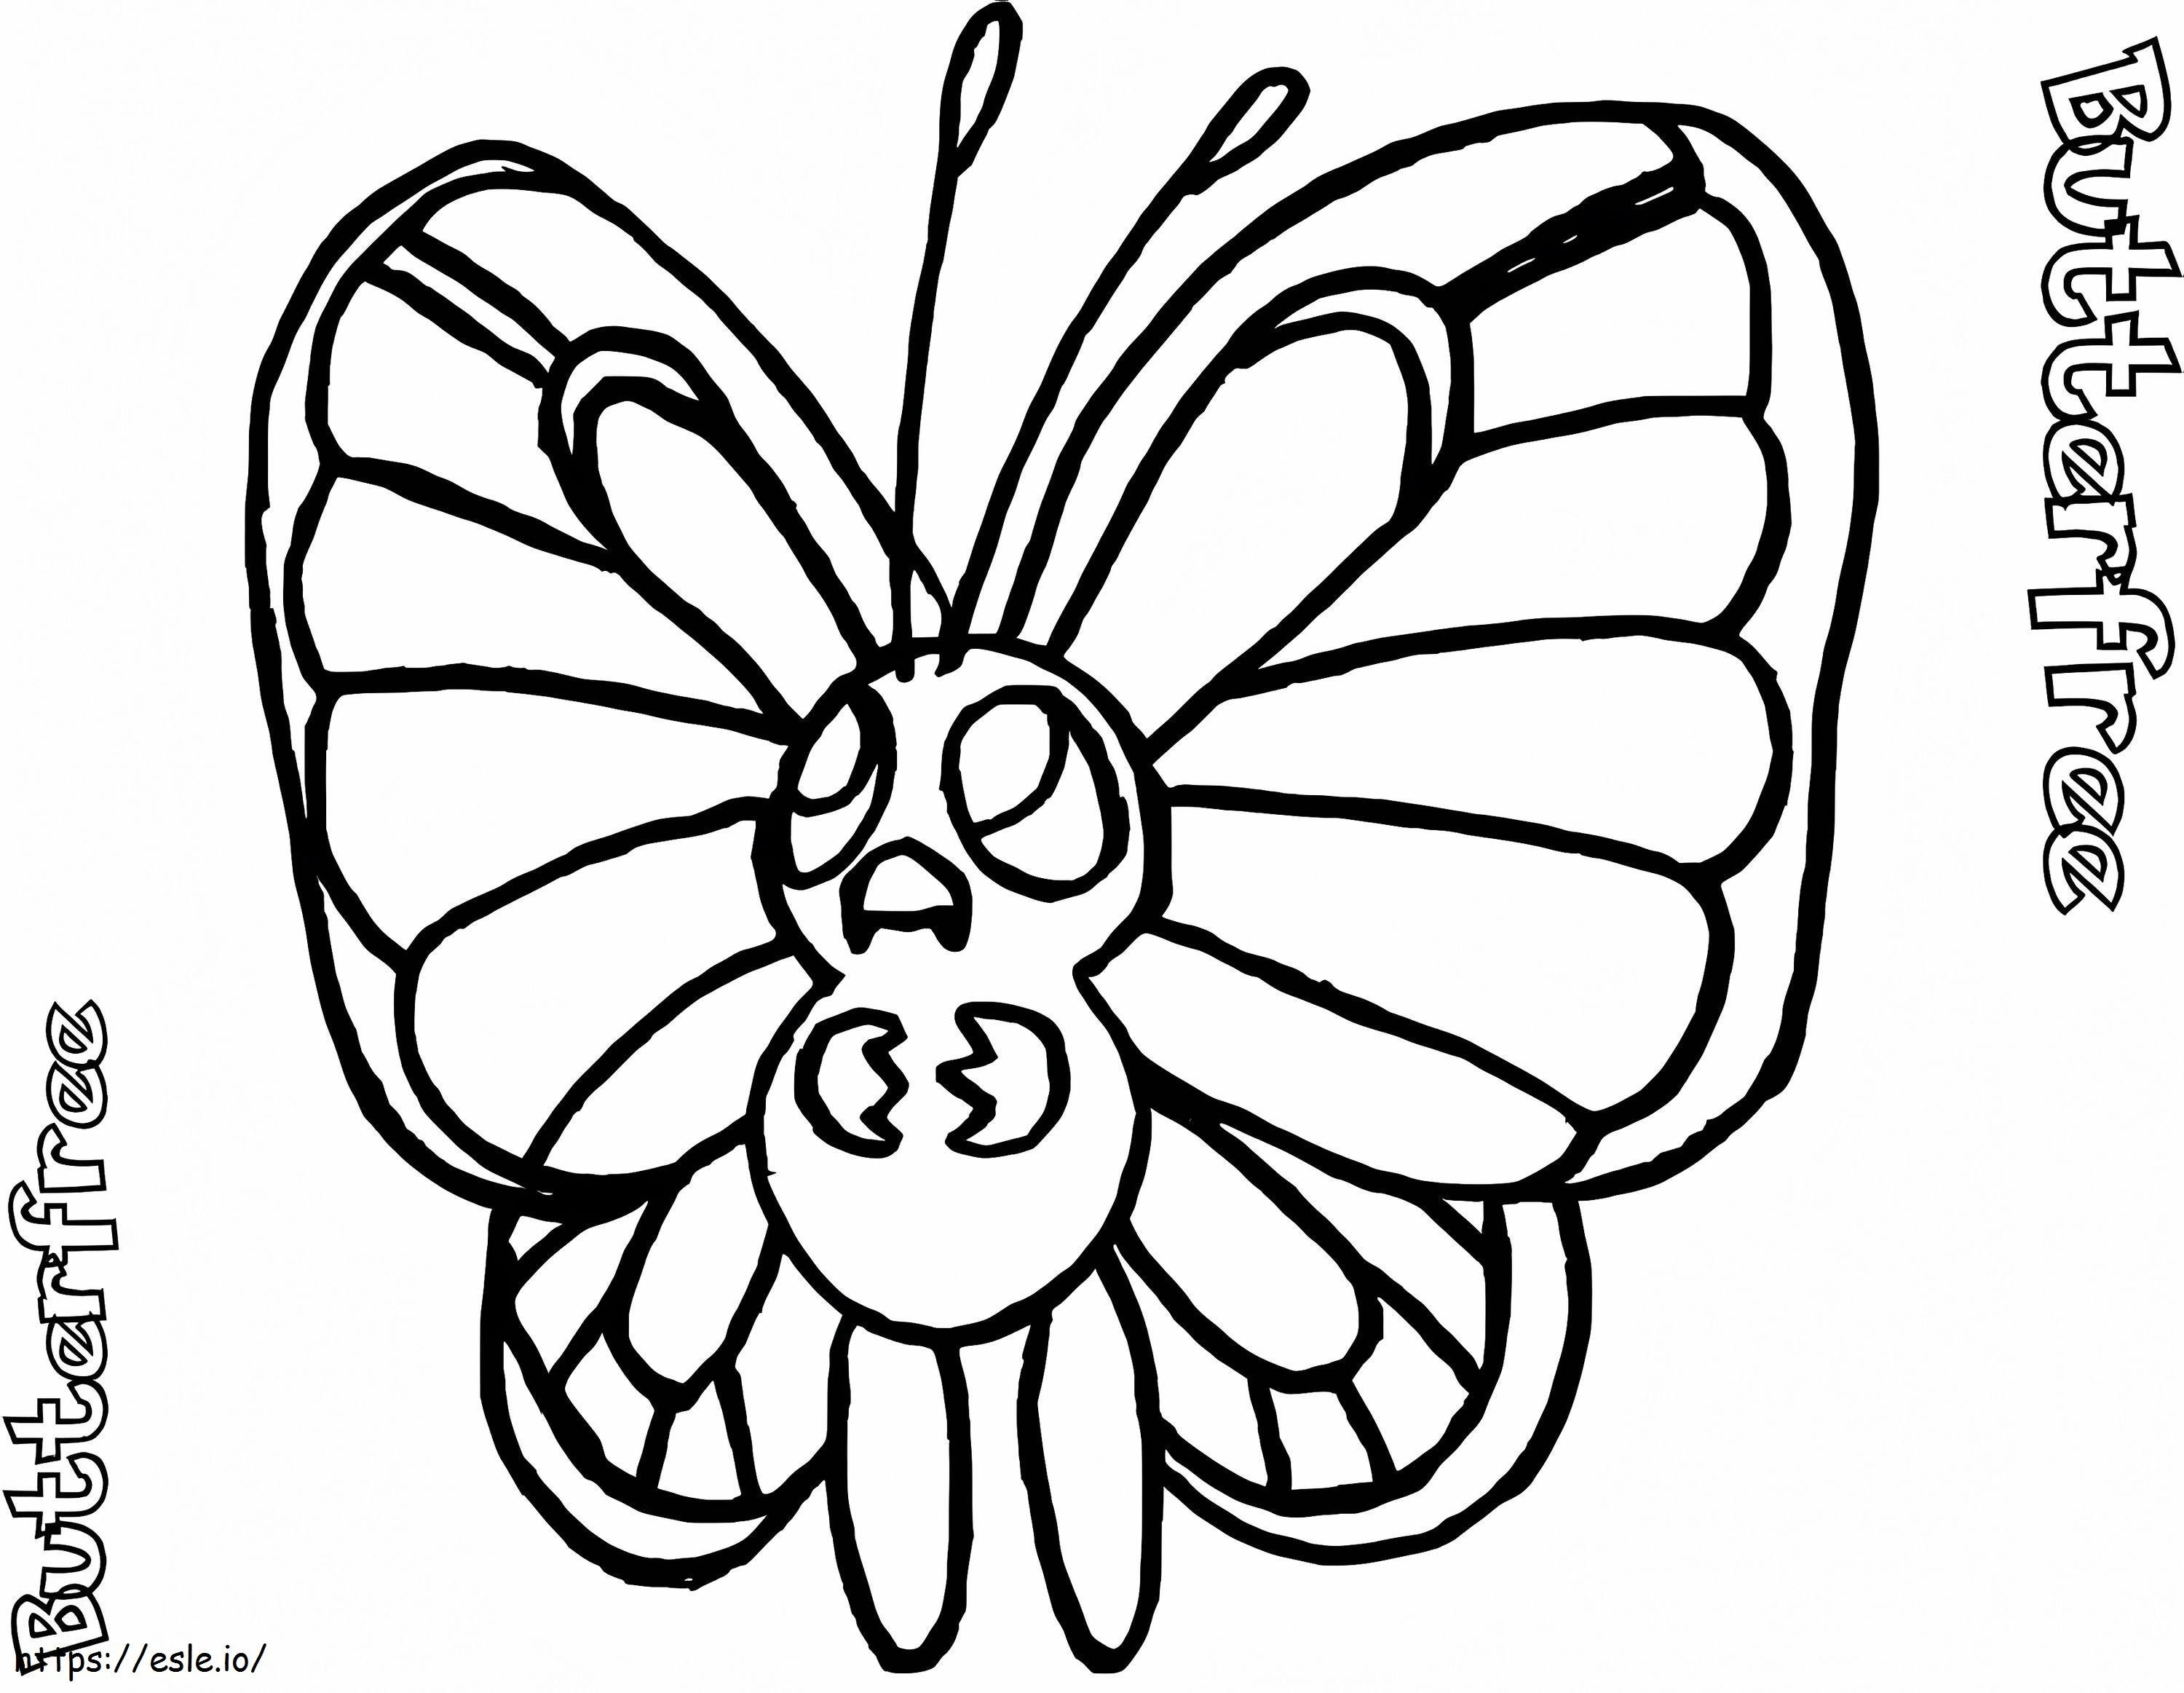 Butterfree 1 coloring page